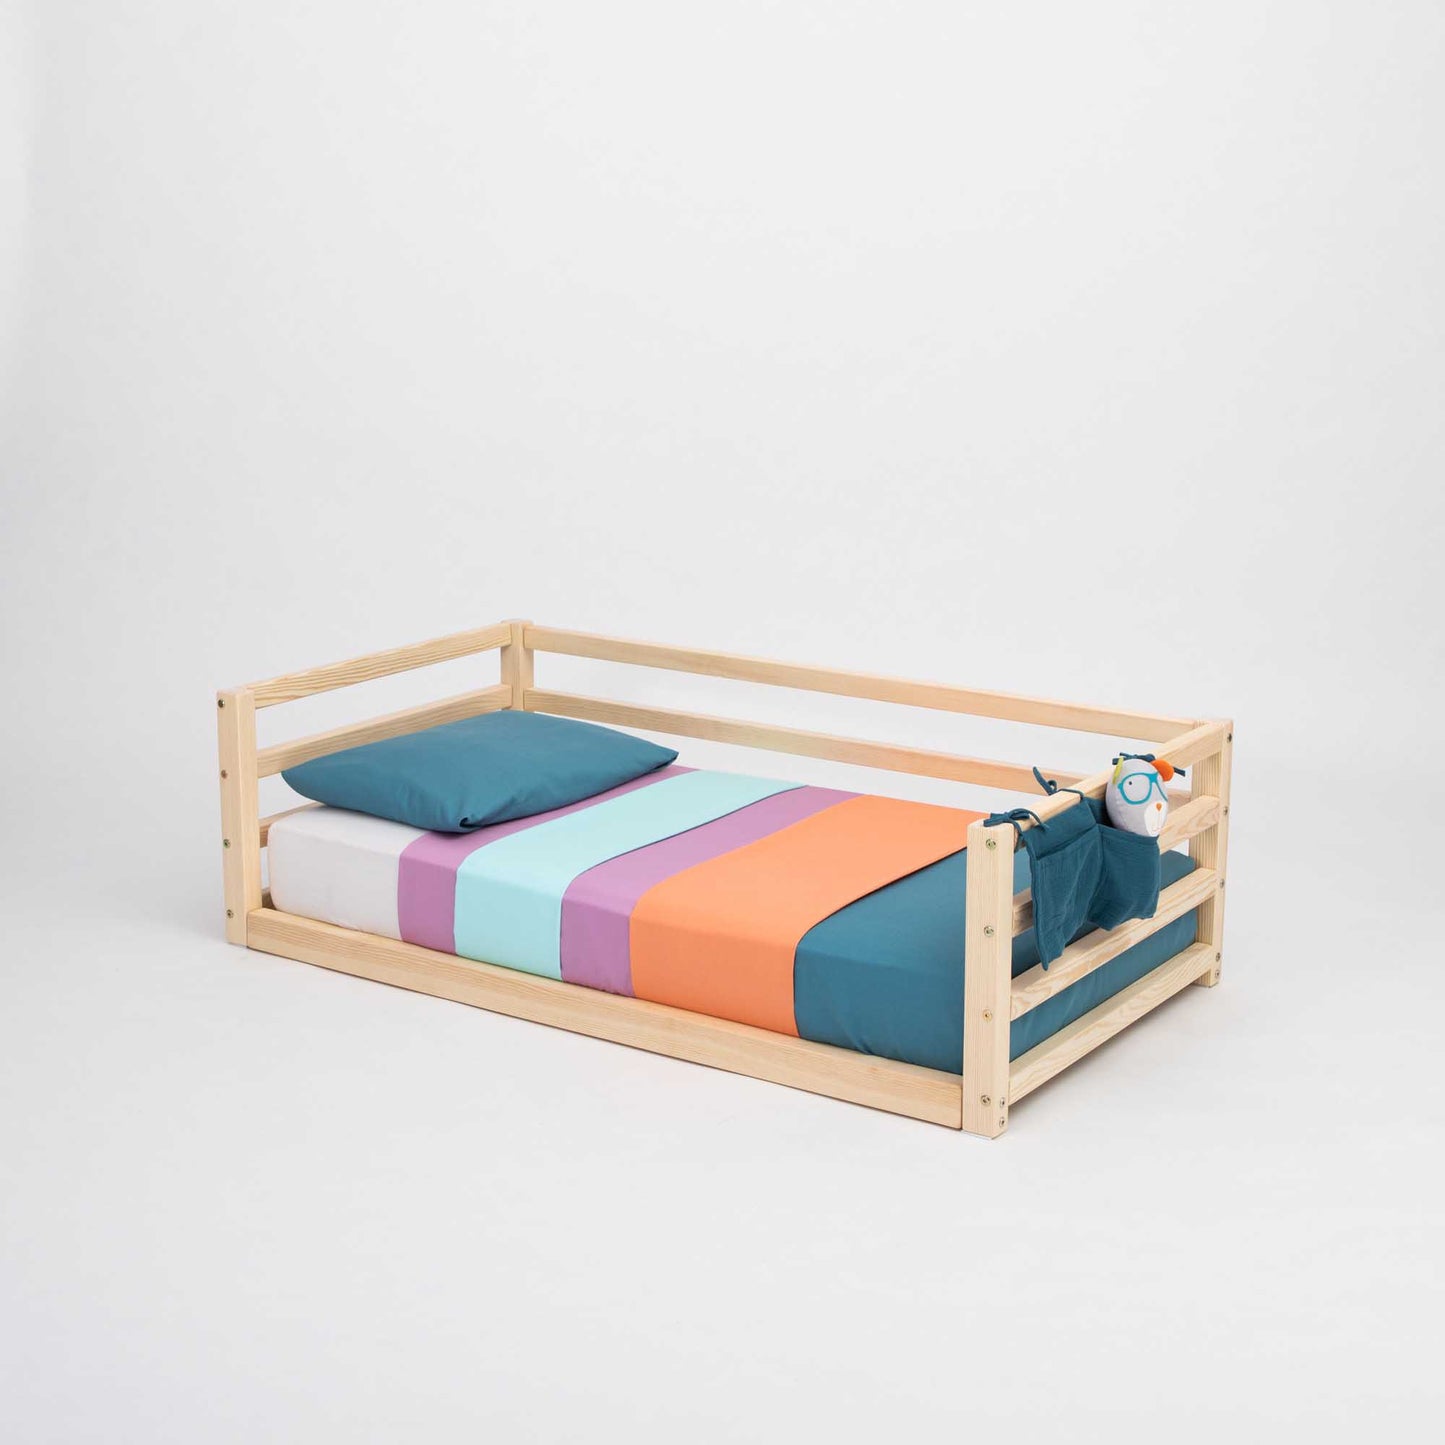 A Sweet Home From Wood transformable kids' bed with colorful sheets and a wooden frame that features a 2-in-1 design, including a 3-sided horizontal rail.